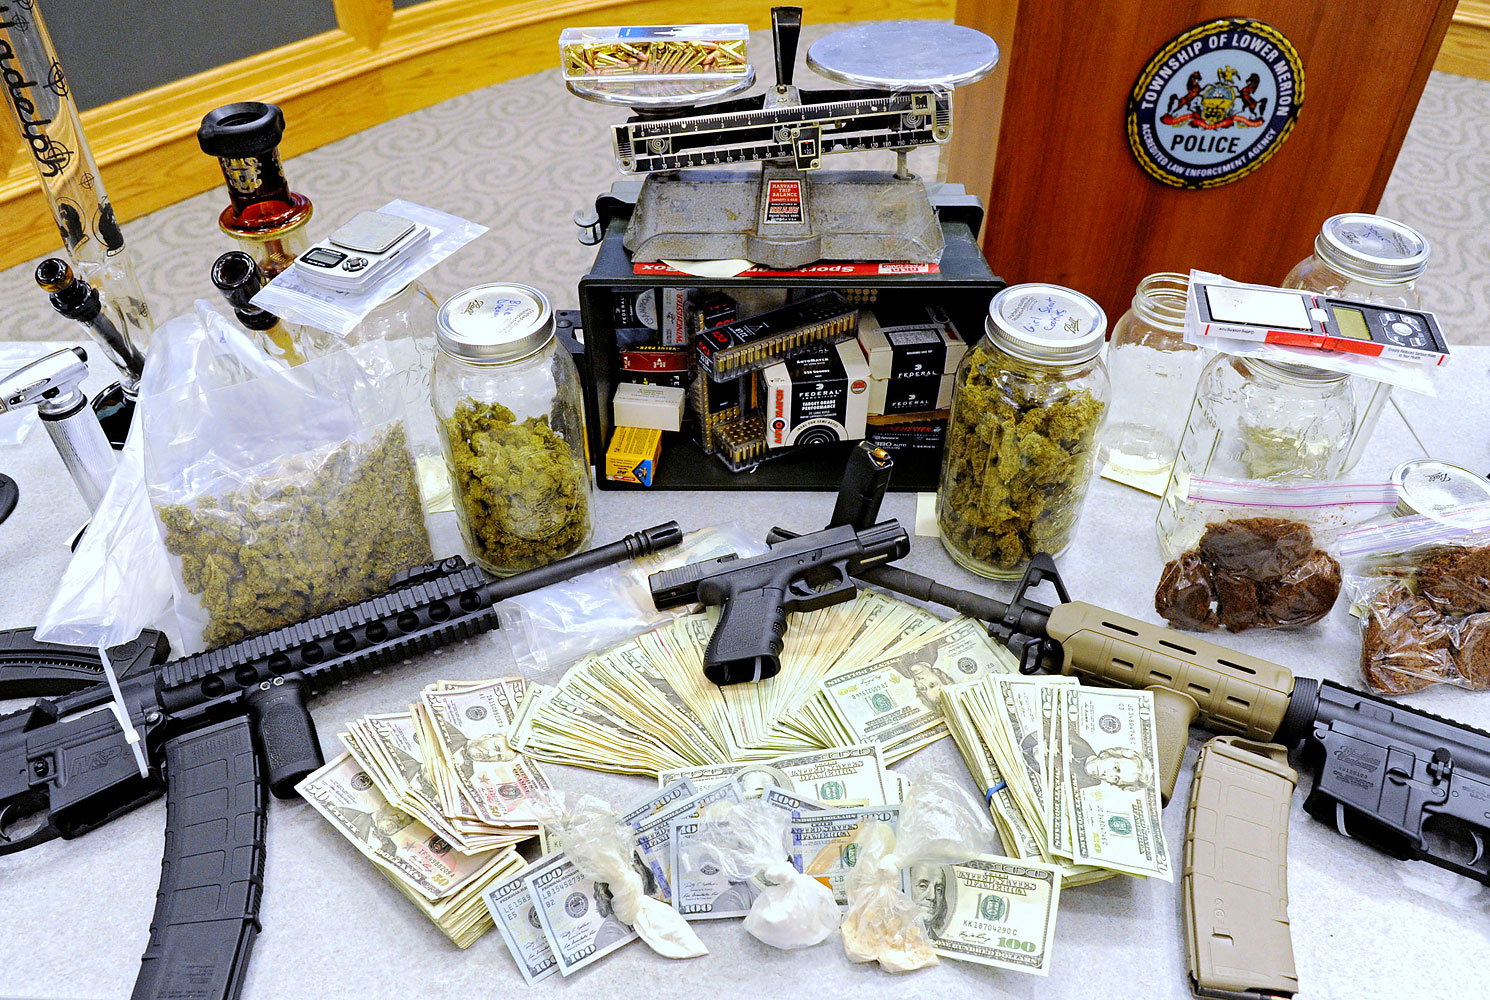 This photo shows drugs, money, guns and other illegal items that were seized when Lower Merion Police broke up a drug distribution ring during a new conference in Montgomery County, Pa, Monday, April 21, 2014.